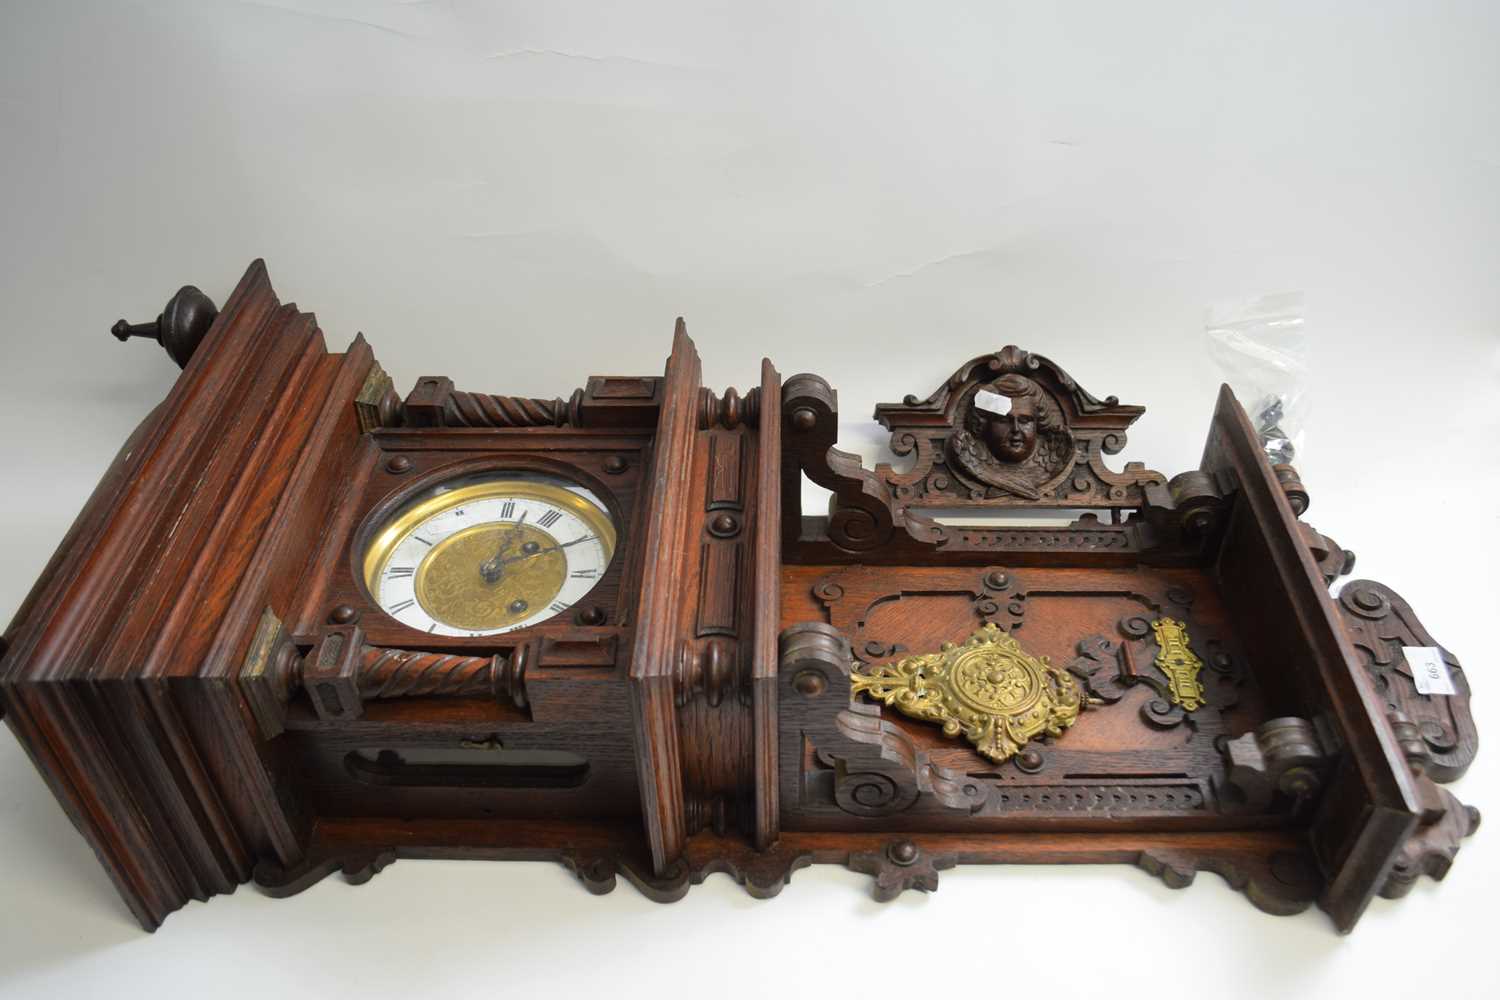 Late 19th Century German wall clock with elaborate architectural oak case with figural pediment,